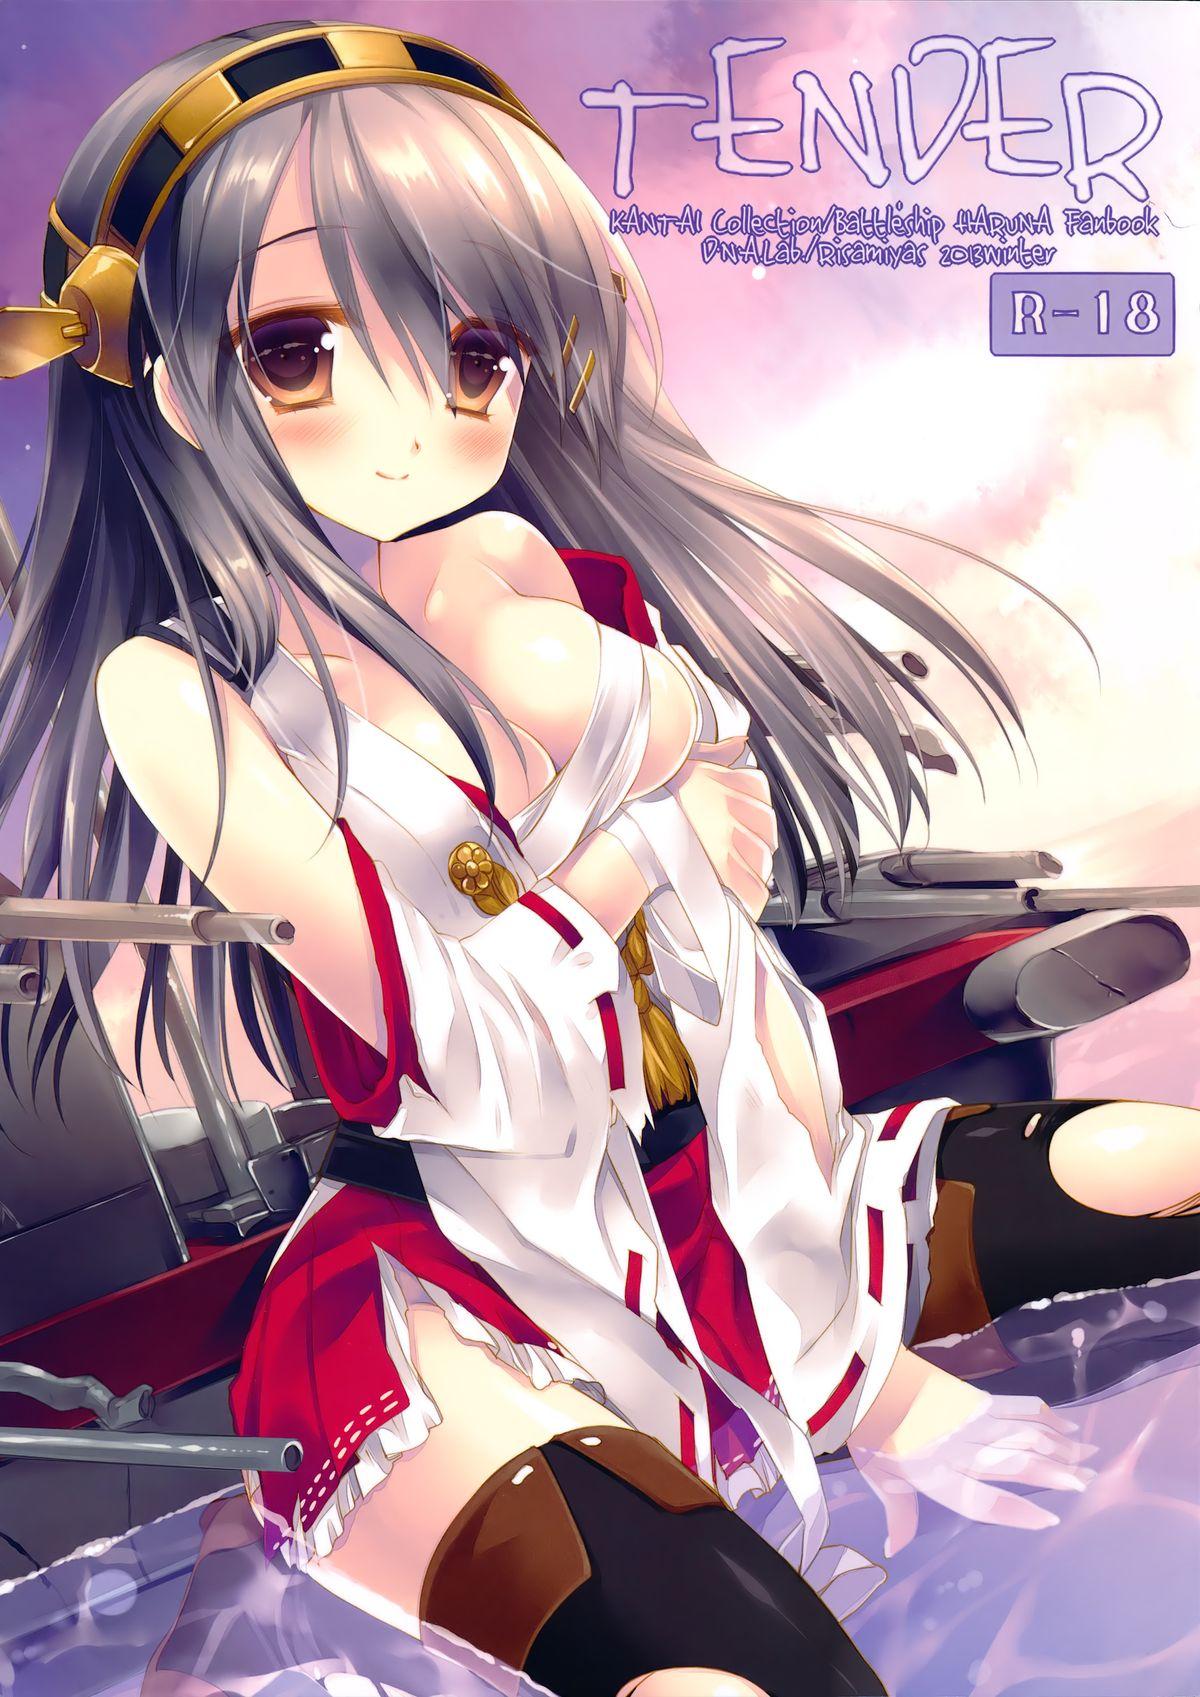 Teenie TENDER - Kantai collection Phat - Picture 1